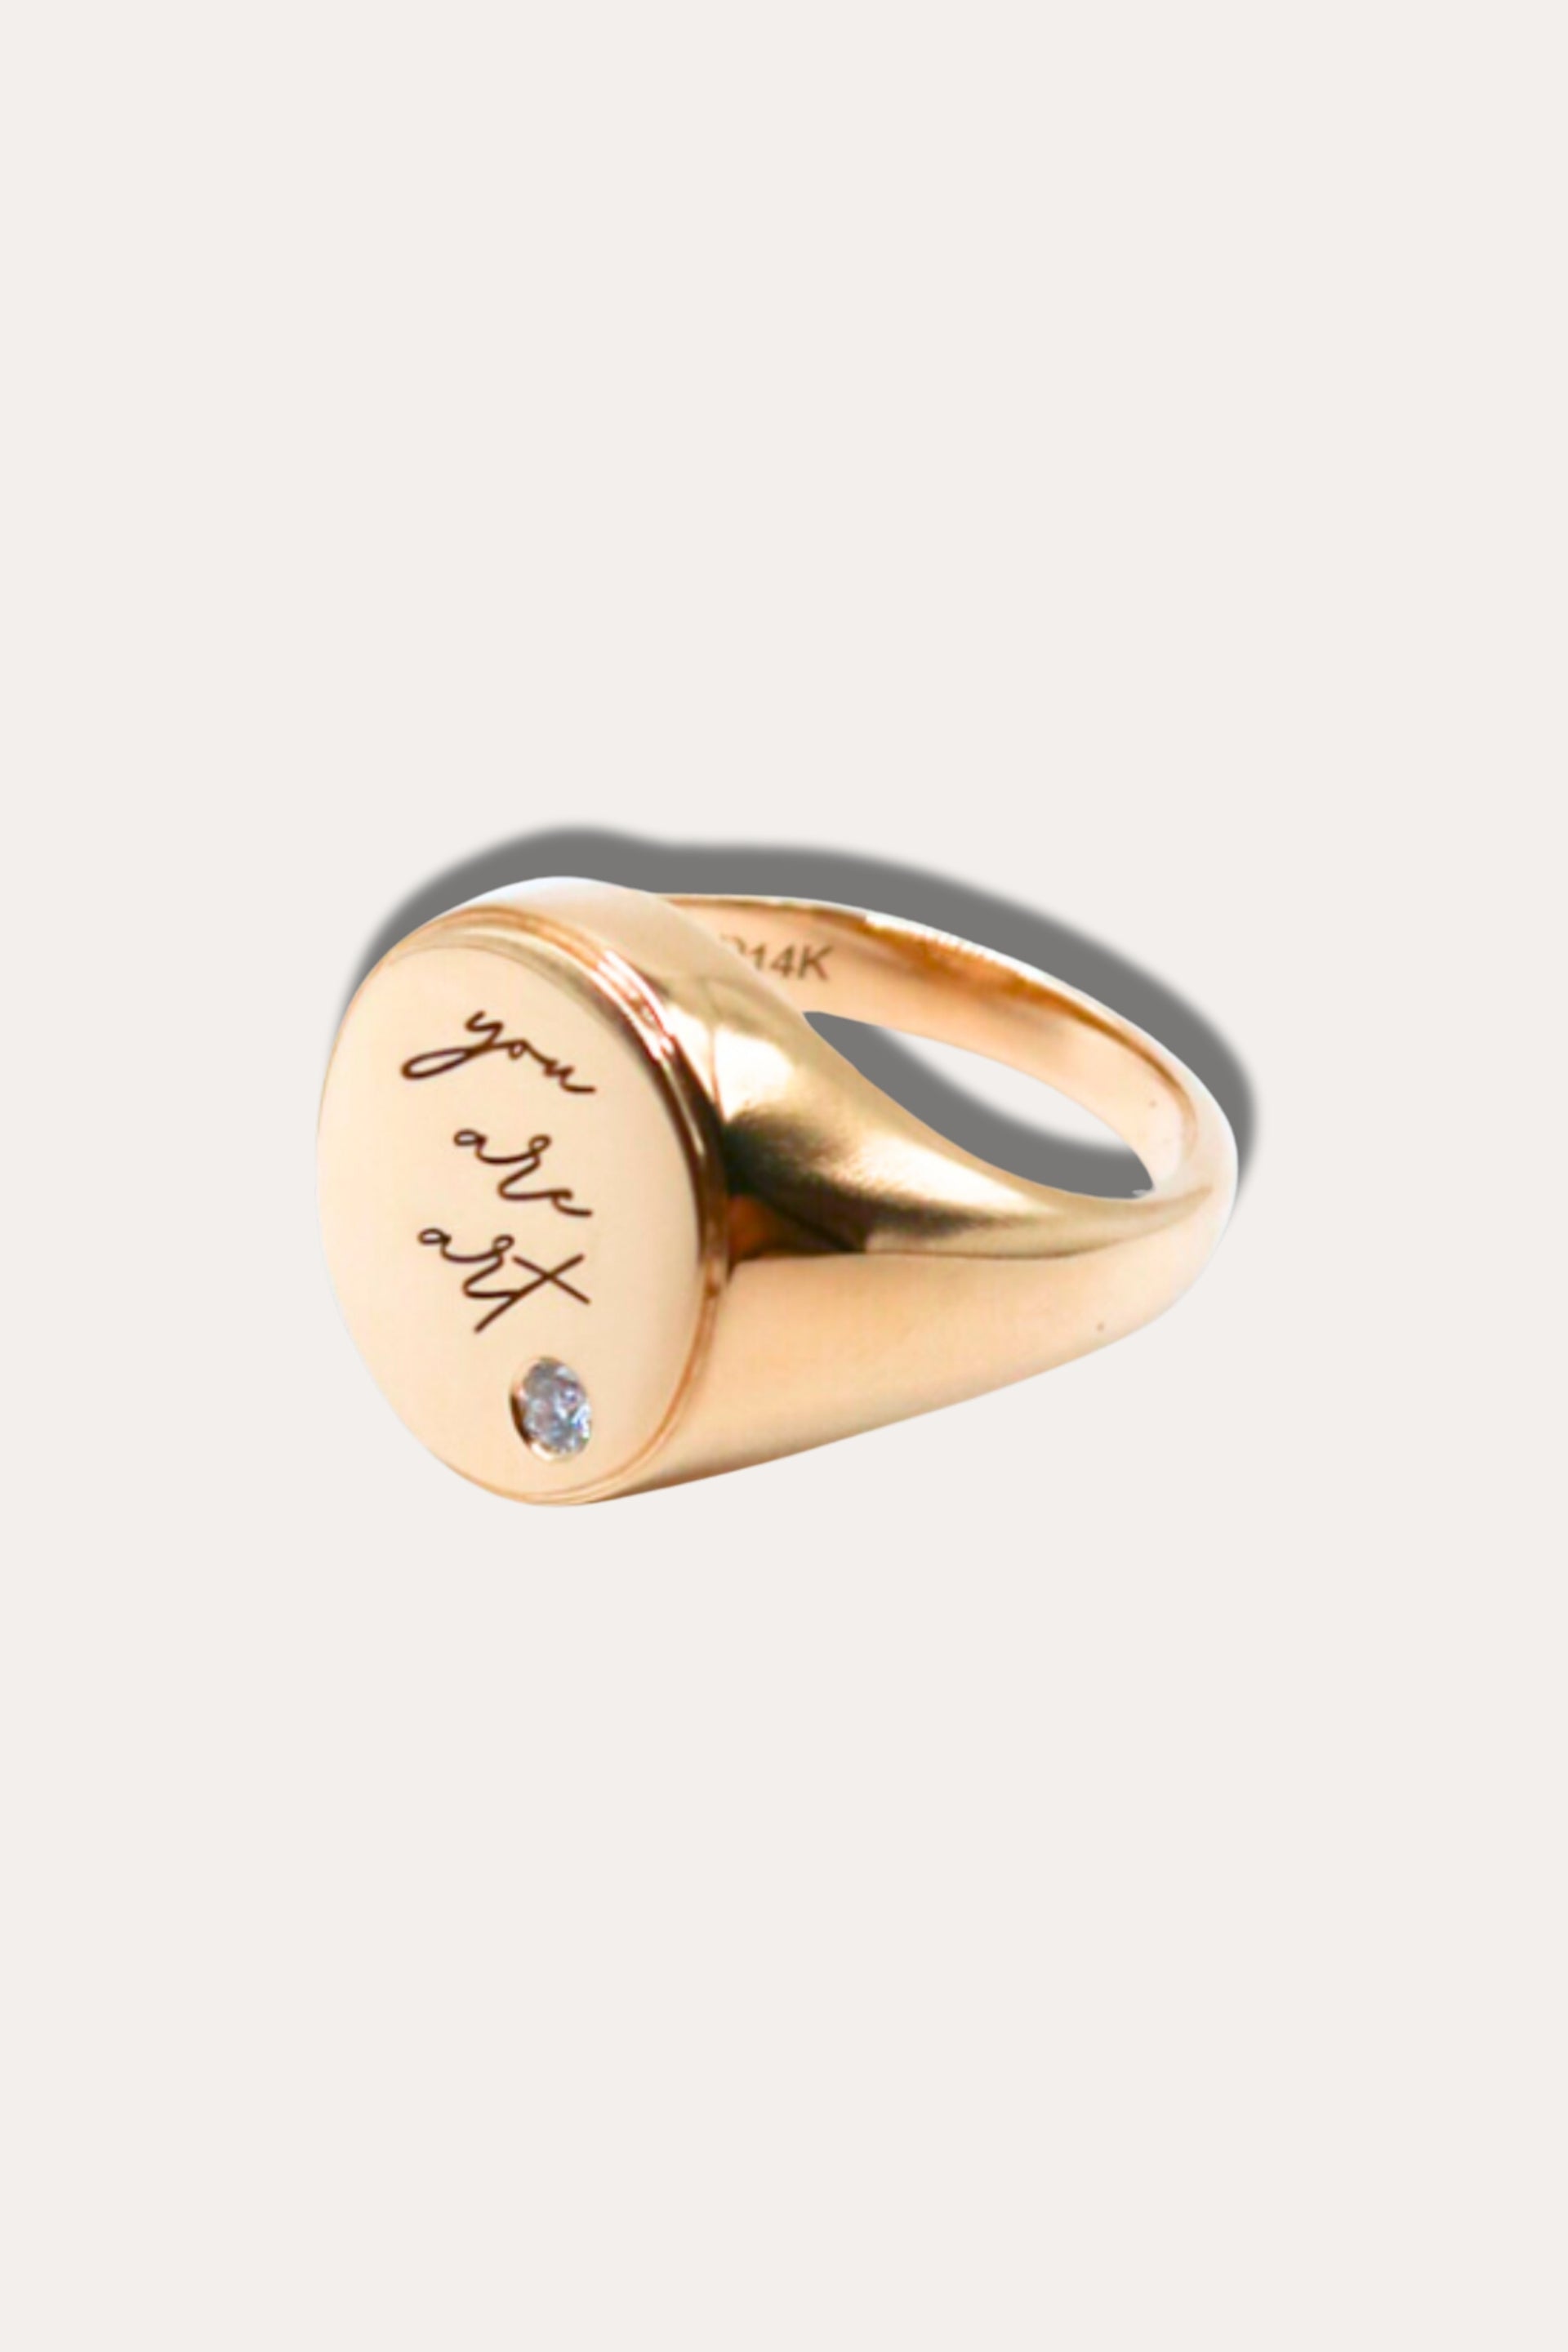 "You Are Art" Ring - 14k Yellow Gold